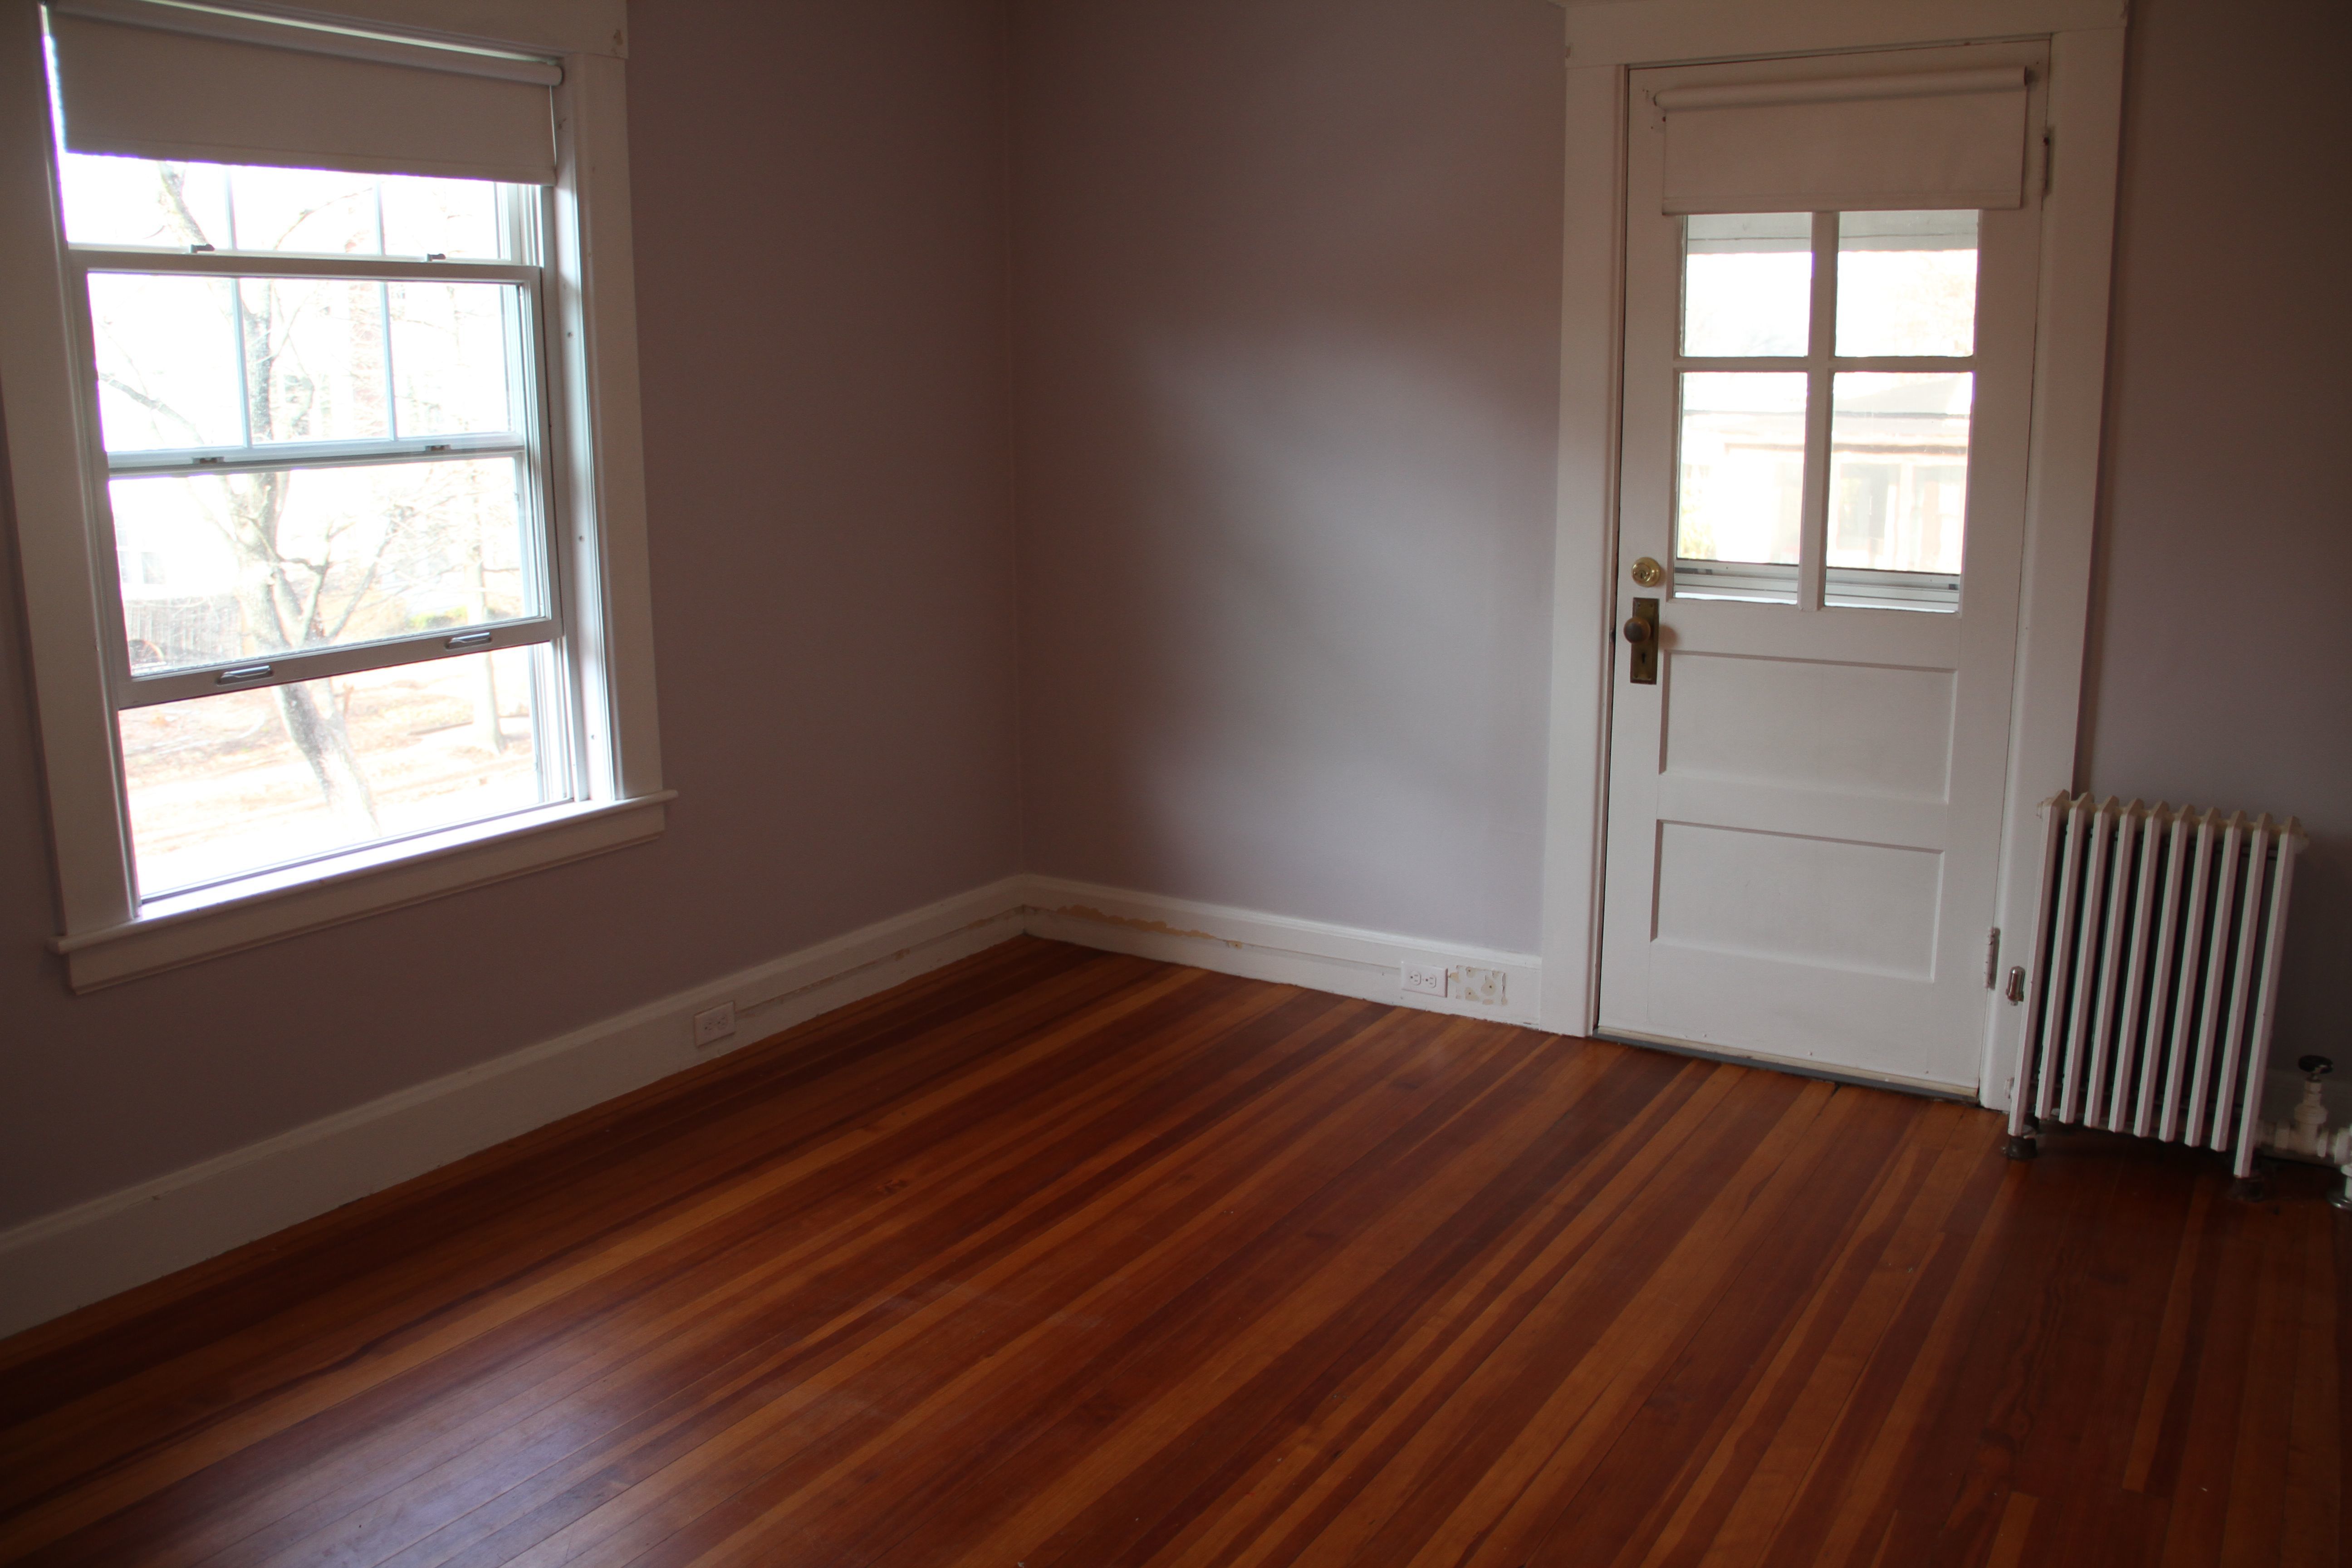 We vacuumed and washed everything: the walls, windows, trim, floors. Ahhhhh.